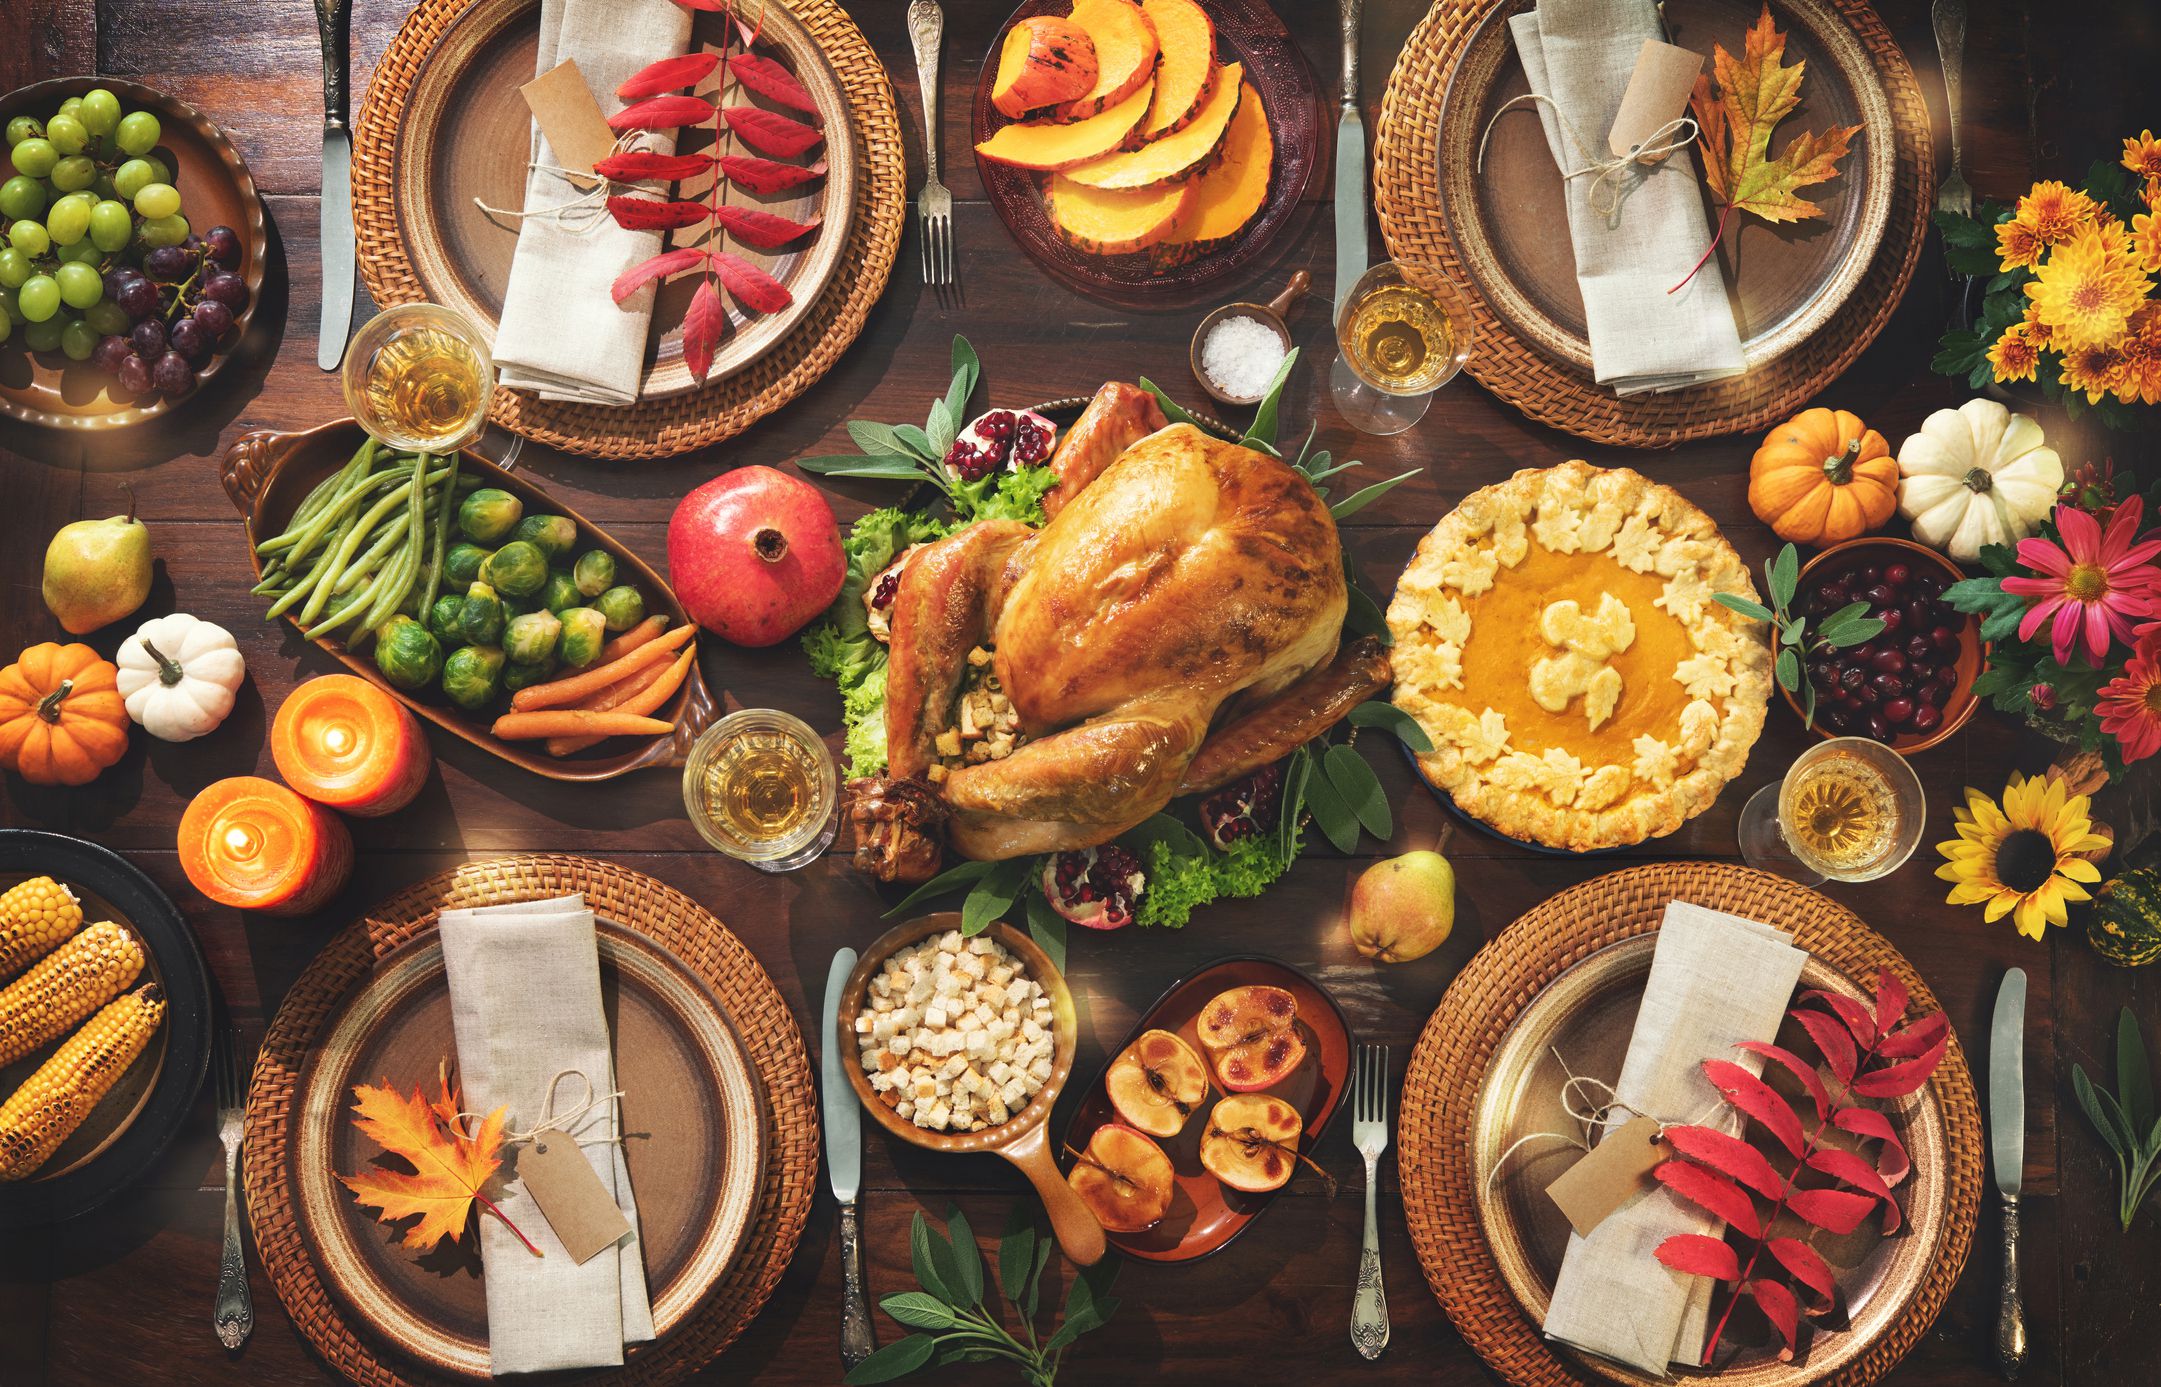 Best Thanksgiving Food (According to Roof Experts)